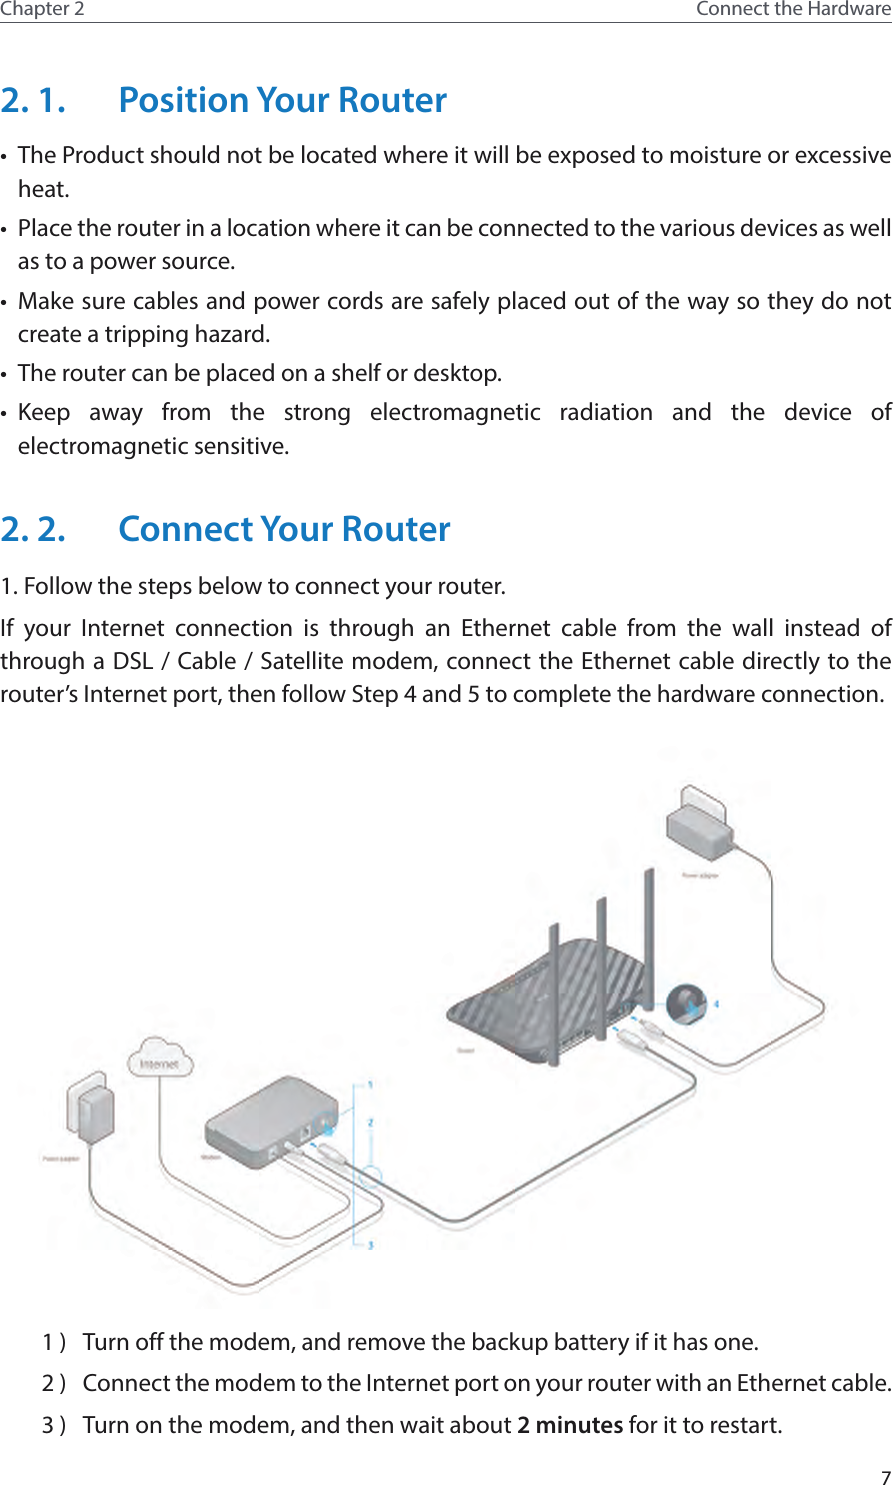 7Chapter 2 Connect the Hardware2. 1.  Position Your Router•  The Product should not be located where it will be exposed to moisture or excessive heat.•  Place the router in a location where it can be connected to the various devices as well as to a power source.•  Make sure cables and power cords are safely placed out of the way so they do not create a tripping hazard.•  The router can be placed on a shelf or desktop.•  Keep away from the strong electromagnetic radiation and the device of electromagnetic sensitive.2. 2.  Connect Your Router1. Follow the steps below to connect your router.If your Internet connection is through an Ethernet cable from the wall instead of through a DSL / Cable / Satellite modem, connect the Ethernet cable directly to the router’s Internet port, then follow Step 4 and 5 to complete the hardware connection.1 )  Turn off the modem, and remove the backup battery if it has one.2 )  Connect the modem to the Internet port on your router with an Ethernet cable.3 )  Turn on the modem, and then wait about 2 minutes for it to restart.